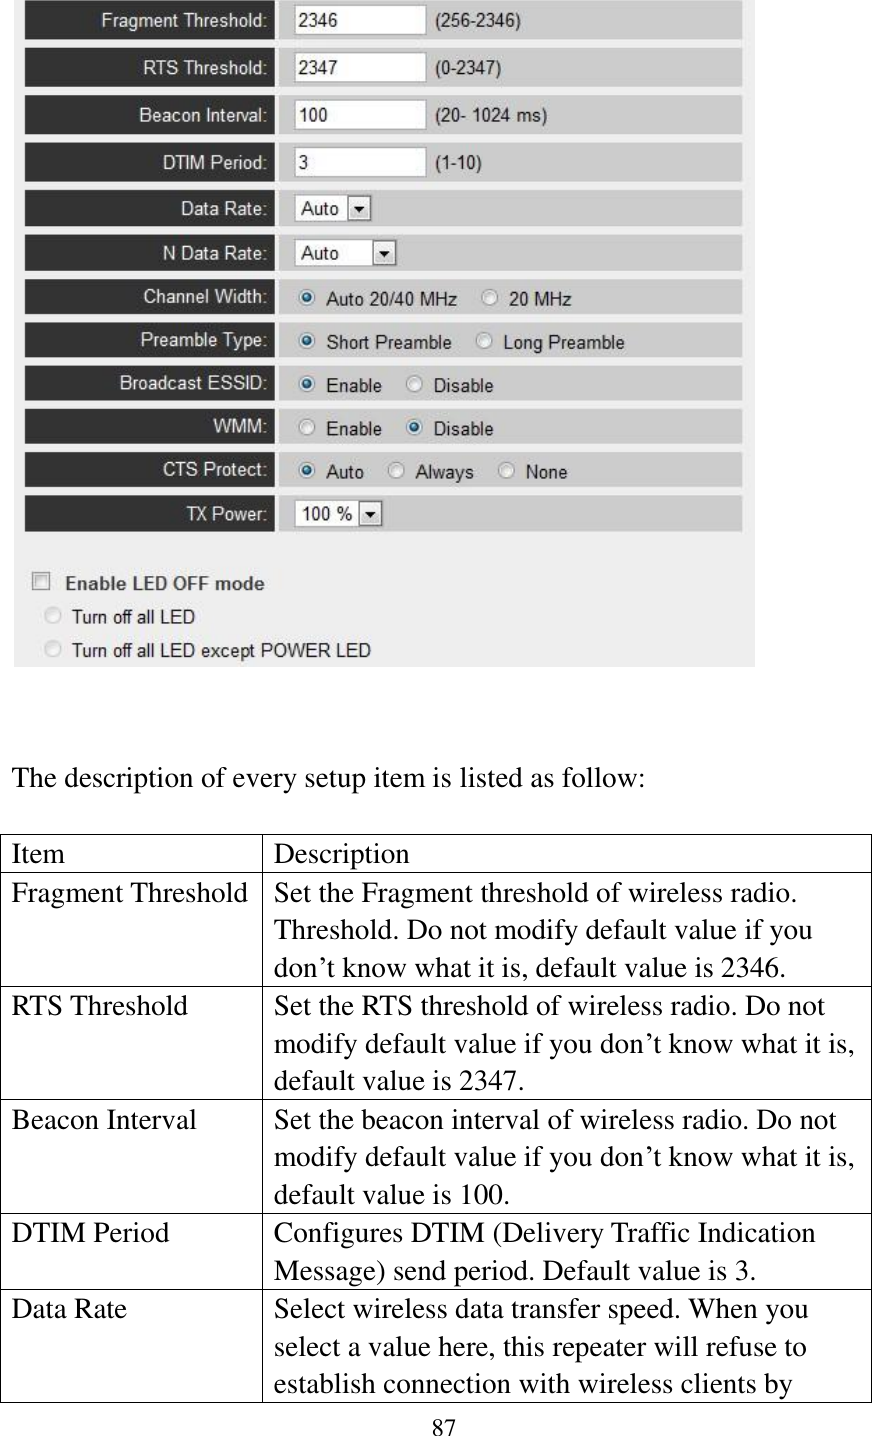 87     The description of every setup item is listed as follow:  Item Description Fragment Threshold Set the Fragment threshold of wireless radio. Threshold. Do not modify default value if you don‟t know what it is, default value is 2346. RTS Threshold Set the RTS threshold of wireless radio. Do not modify default value if you don‟t know what it is, default value is 2347. Beacon Interval Set the beacon interval of wireless radio. Do not modify default value if you don‟t know what it is, default value is 100. DTIM Period Configures DTIM (Delivery Traffic Indication Message) send period. Default value is 3. Data Rate Select wireless data transfer speed. When you select a value here, this repeater will refuse to establish connection with wireless clients by 